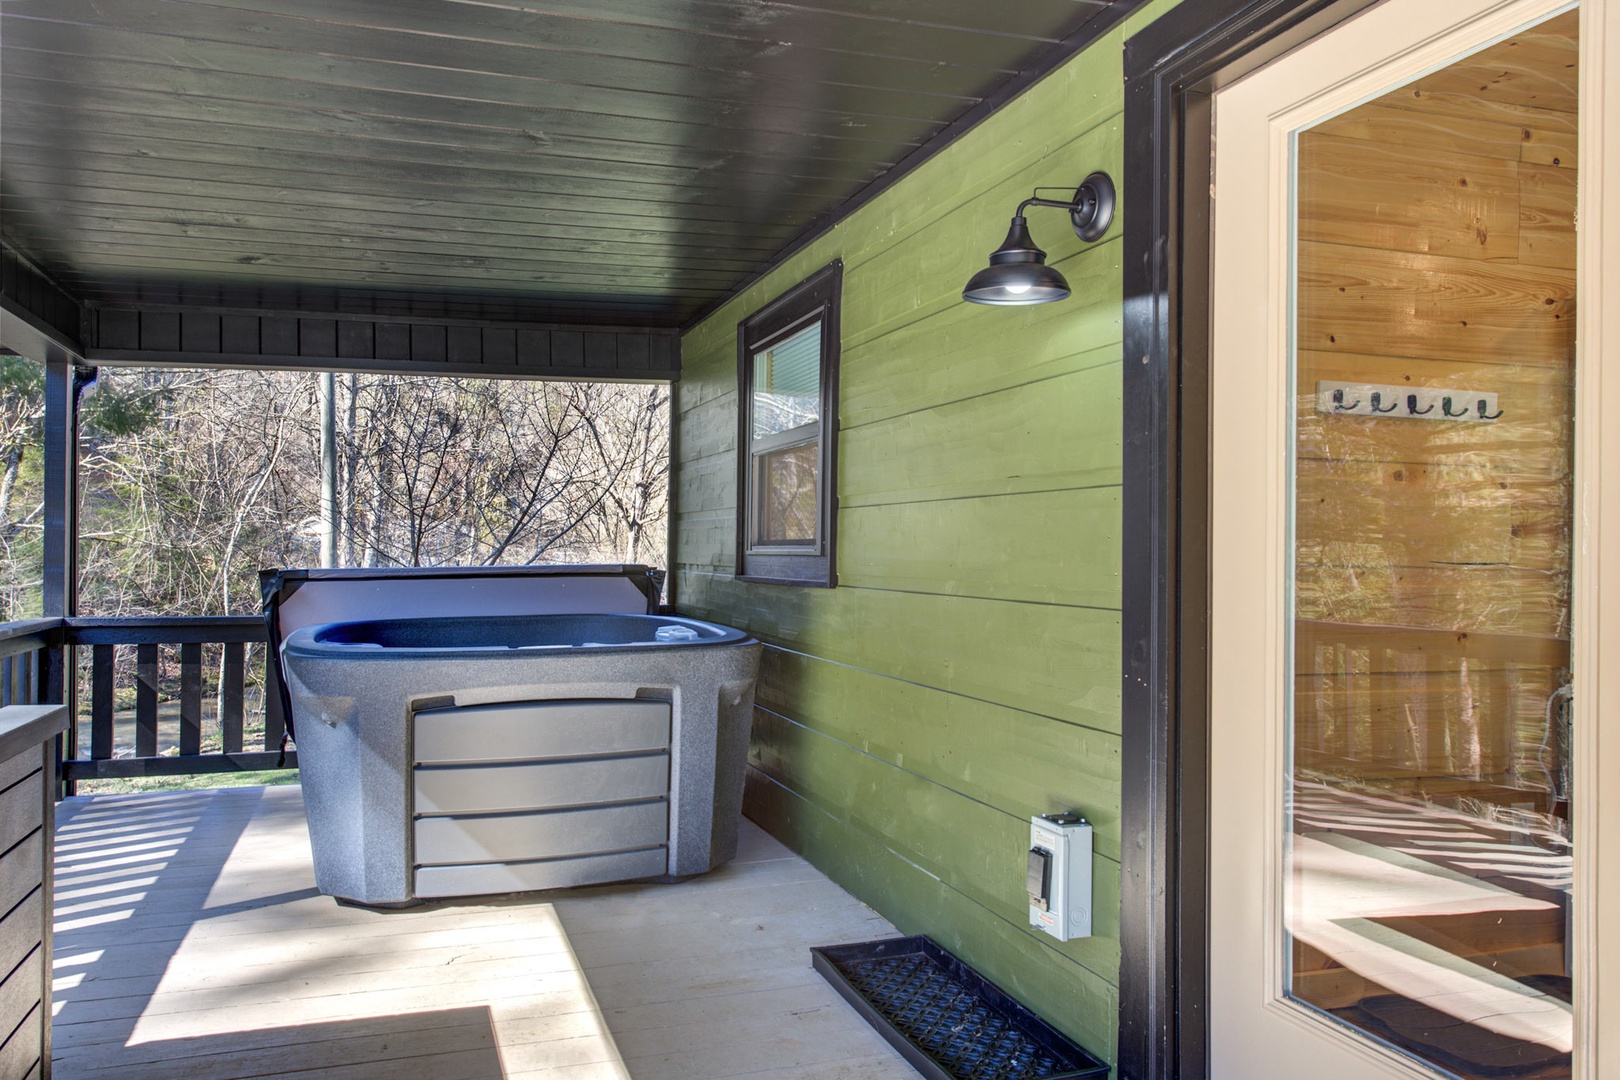 An idyllic retreat: chairs & hot tub, perfect for relaxation